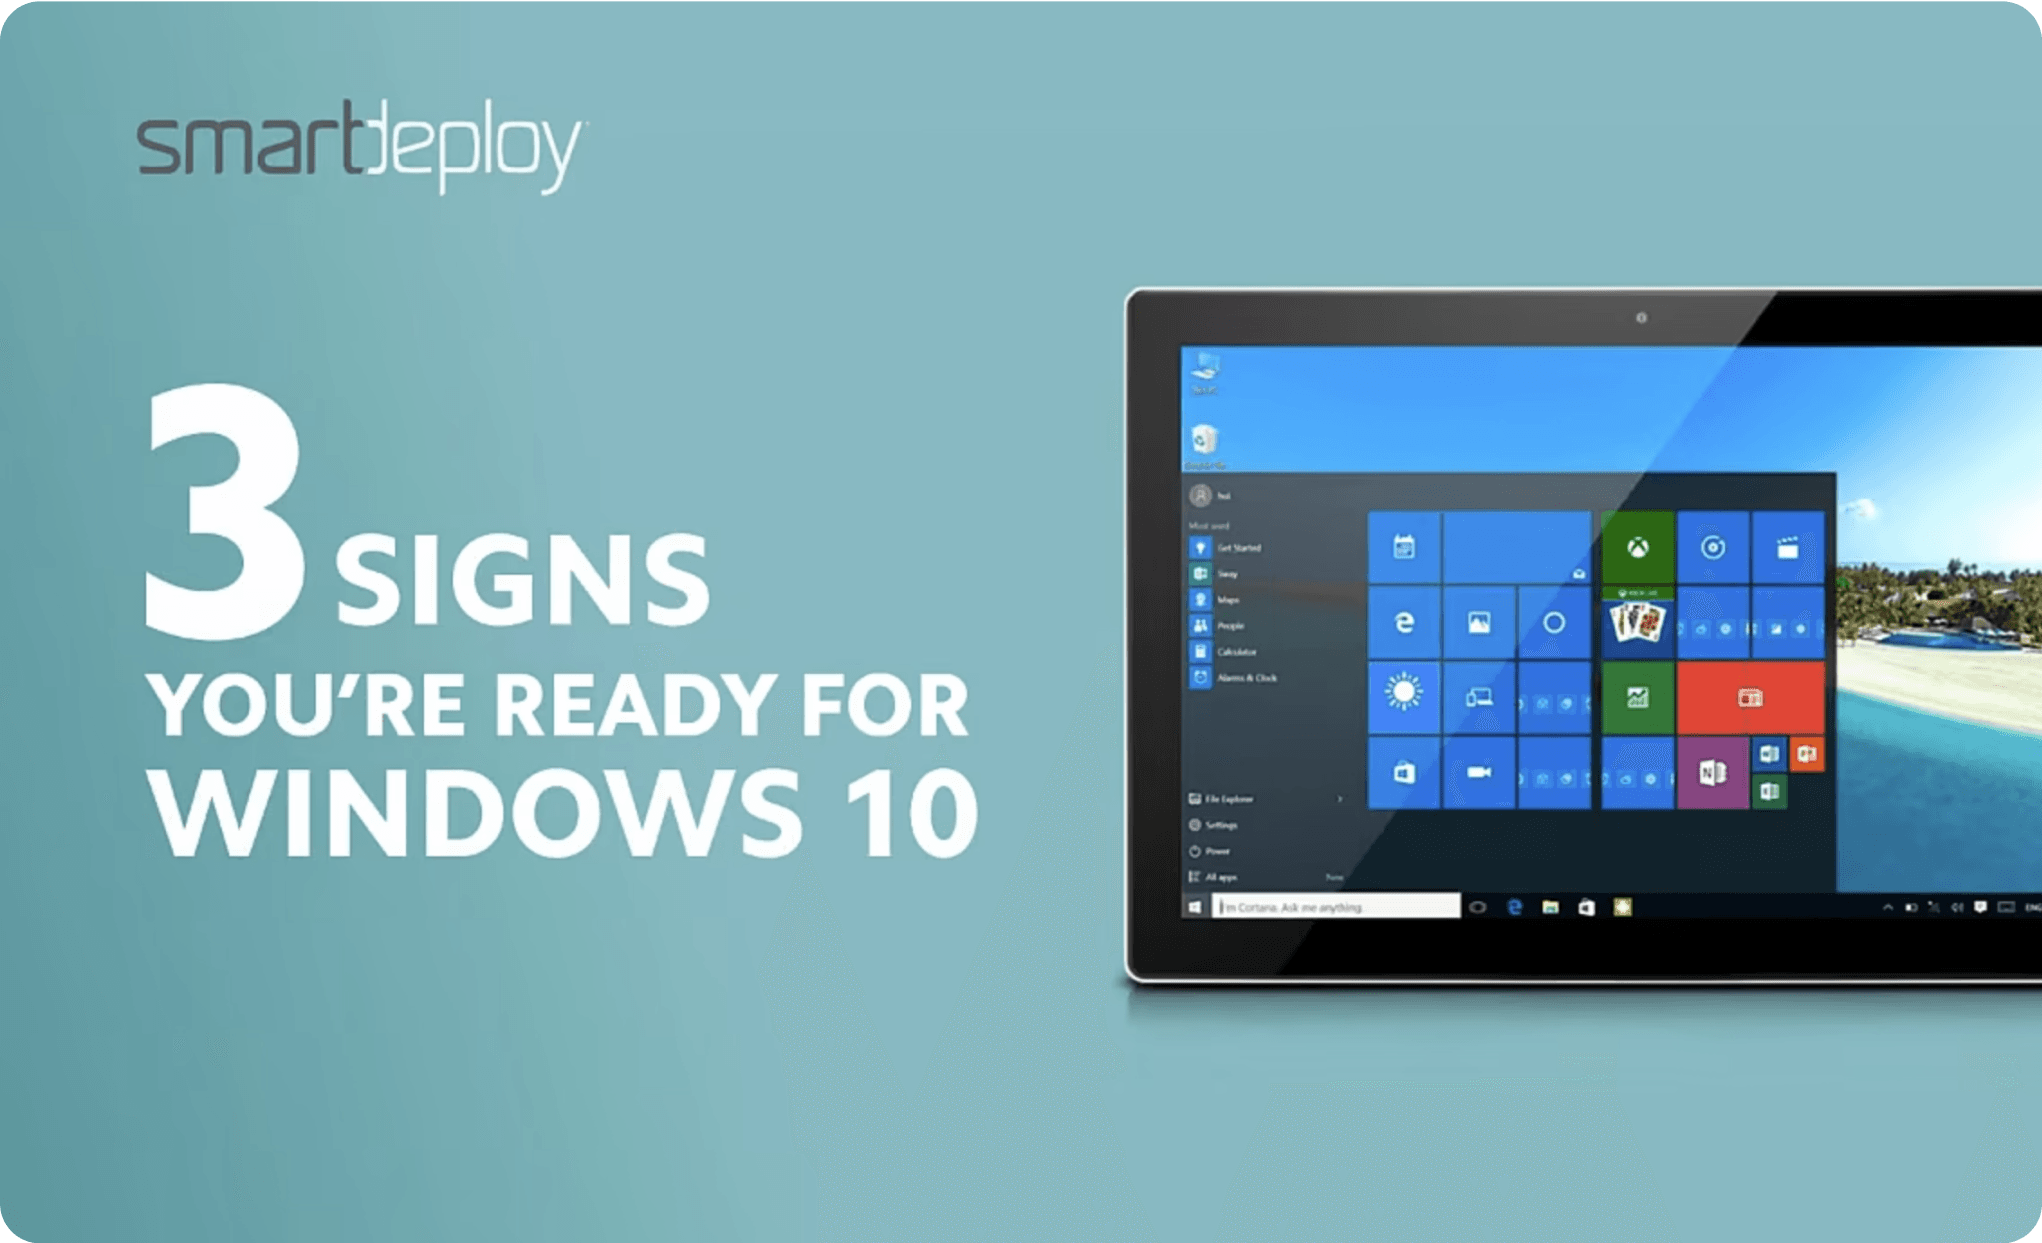  3 signs you’re ready for Windows 10